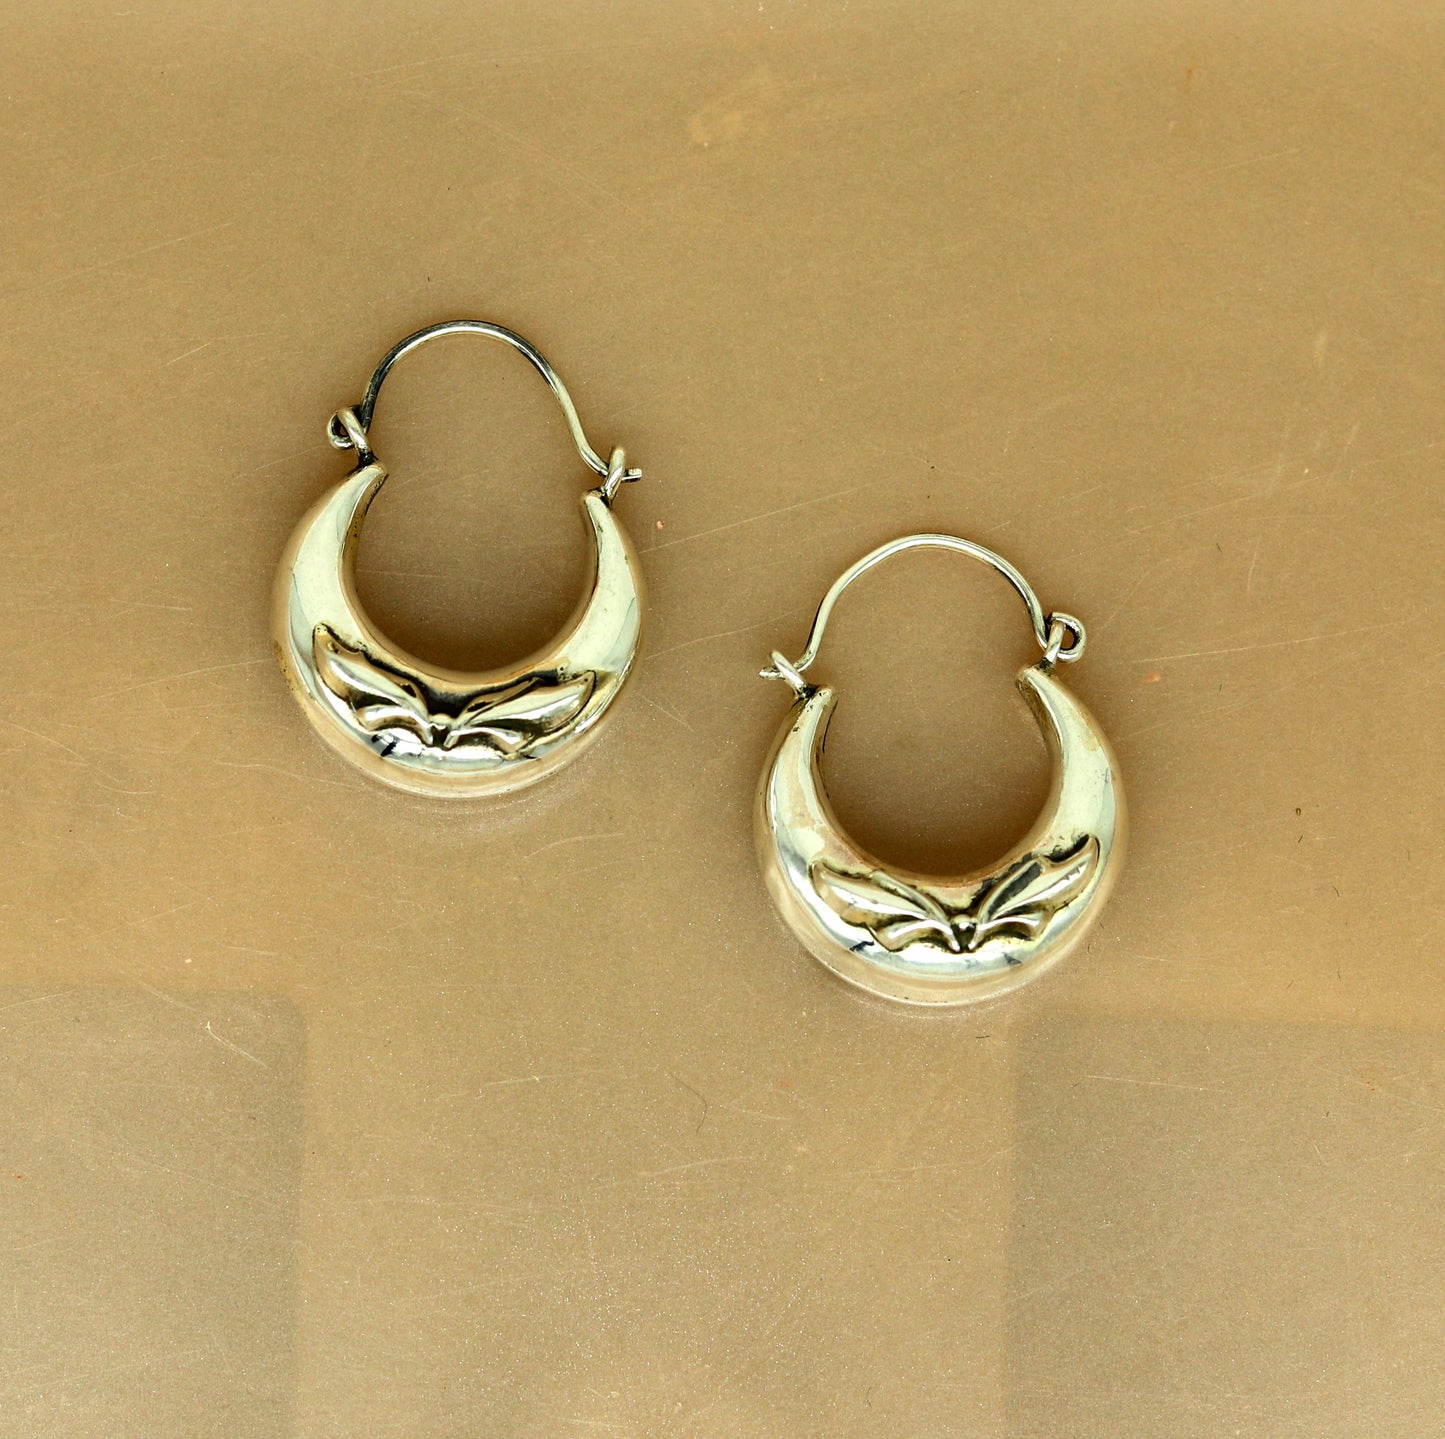 925 sterling silver handmade pretty attractive hoops stud earring bali, excellent customized stylish belly dance personalized gift ske7 - TRIBAL ORNAMENTS